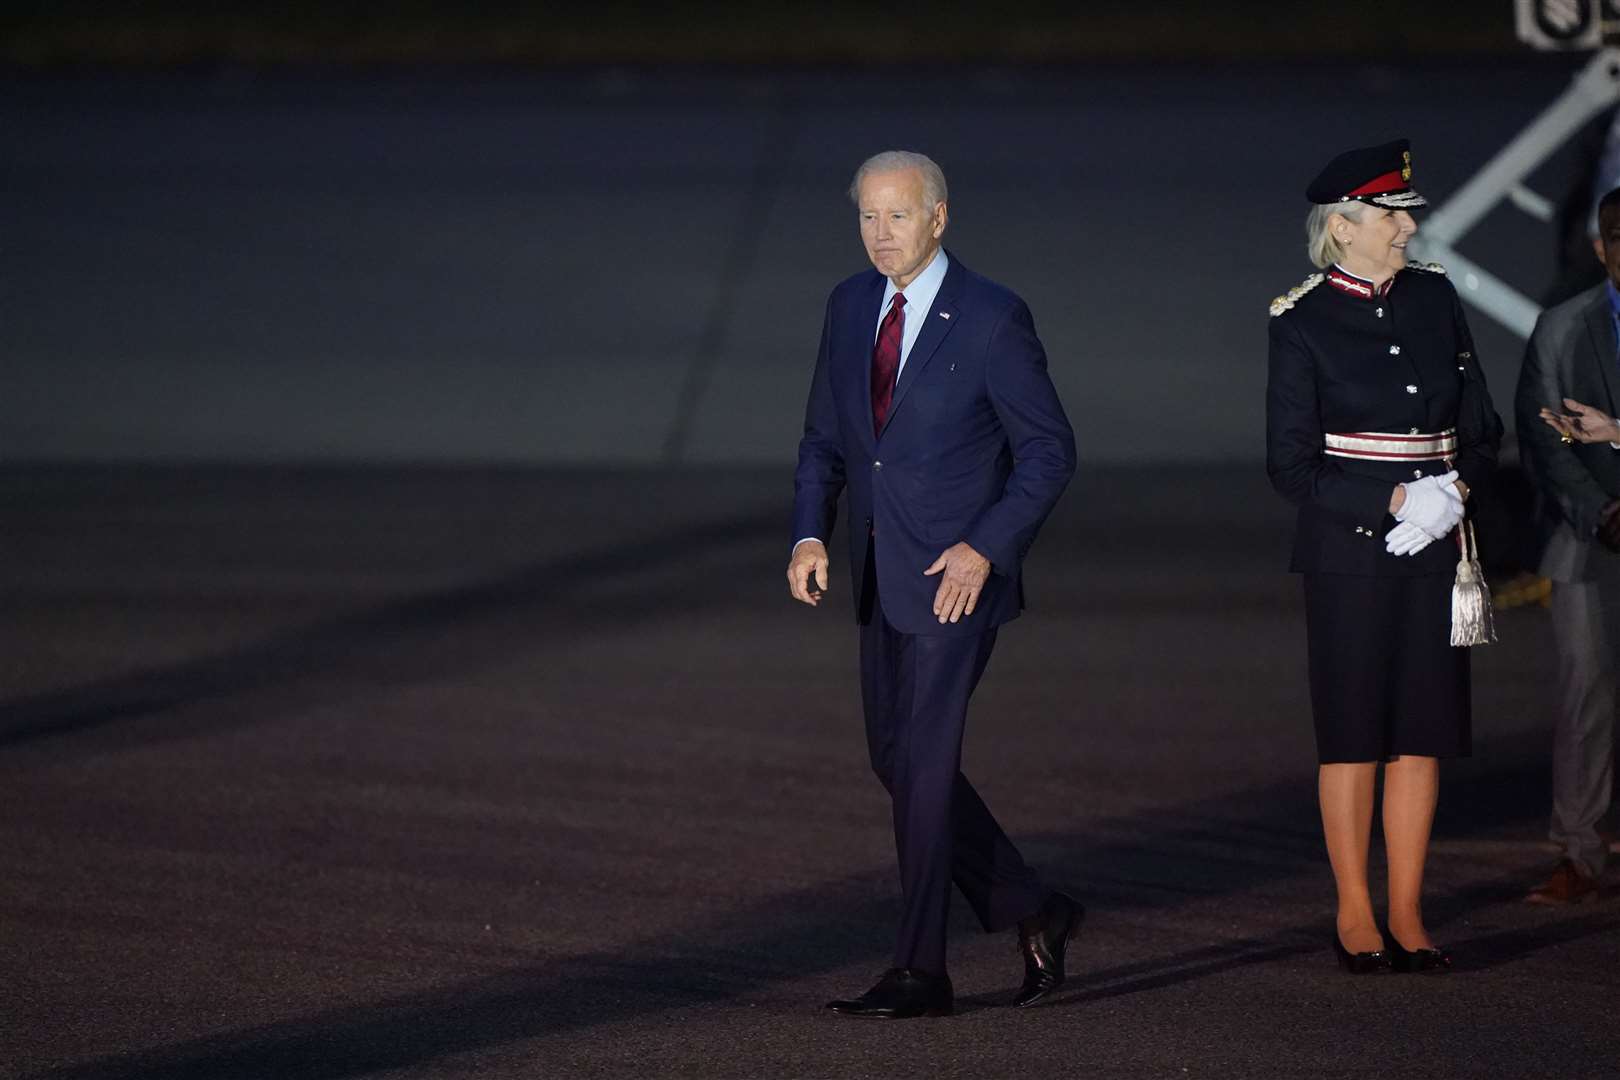 US president Joe Biden arrives on Air Force One at Stansted Airport (Joe Giddens/PA)